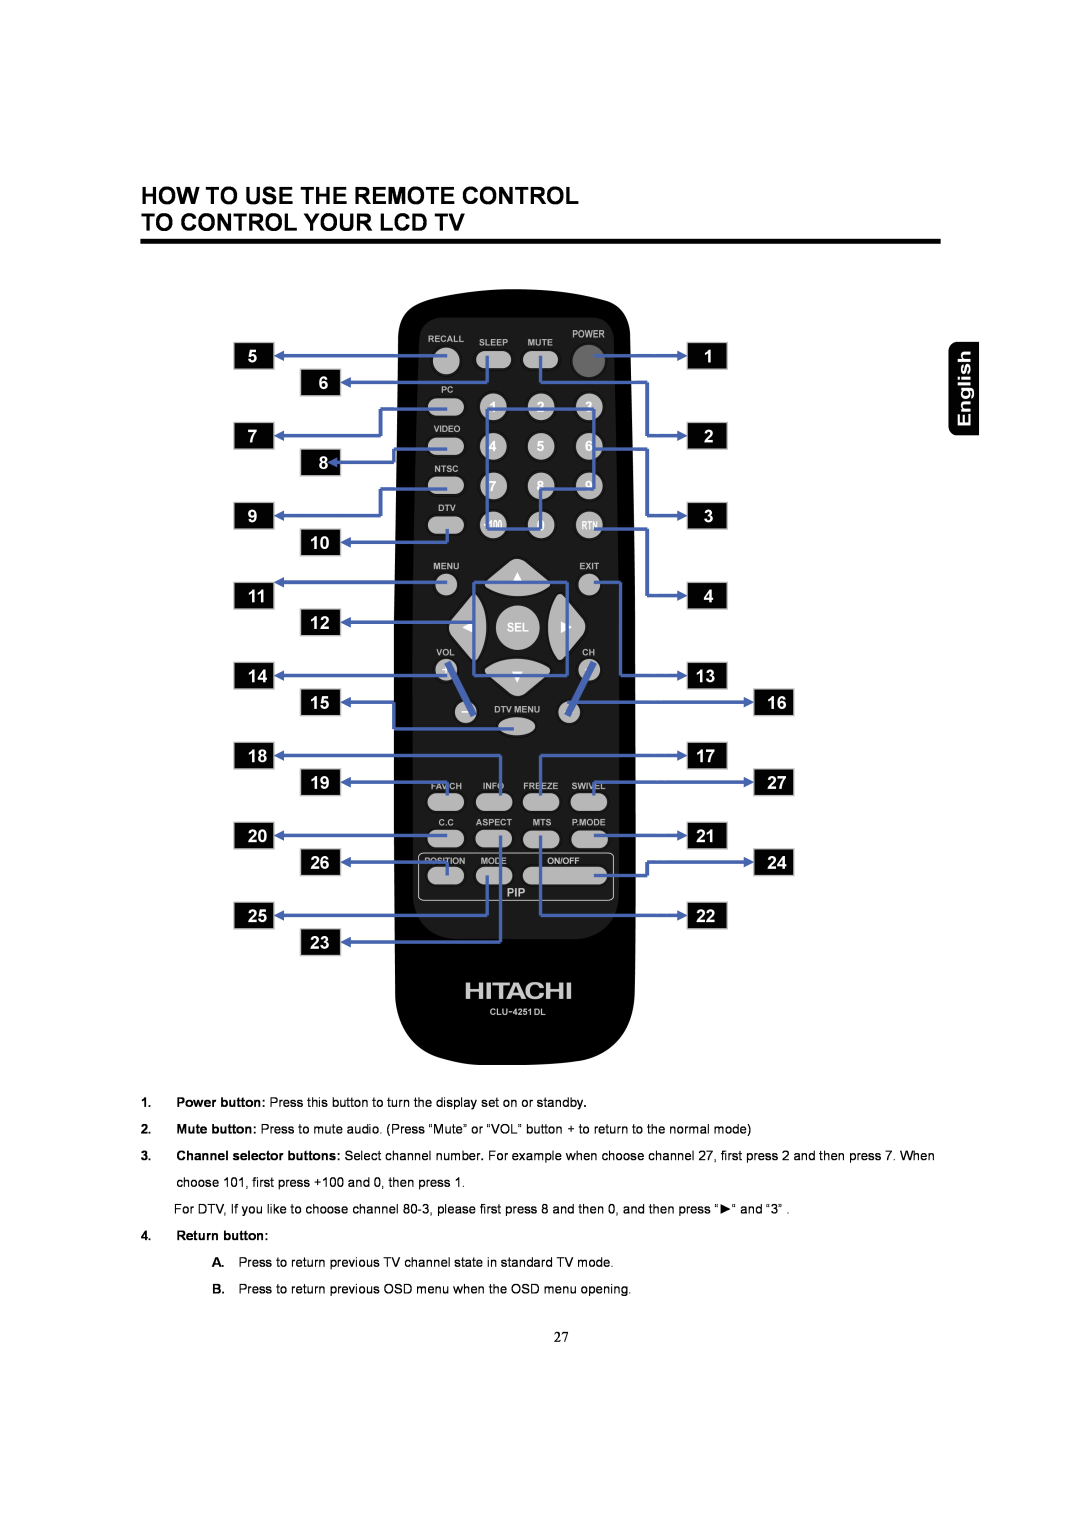 Hitachi 37HDL52A, 32HDL52A How To Use The Remote Control To Control Your Lcd Tv, English, Return button 